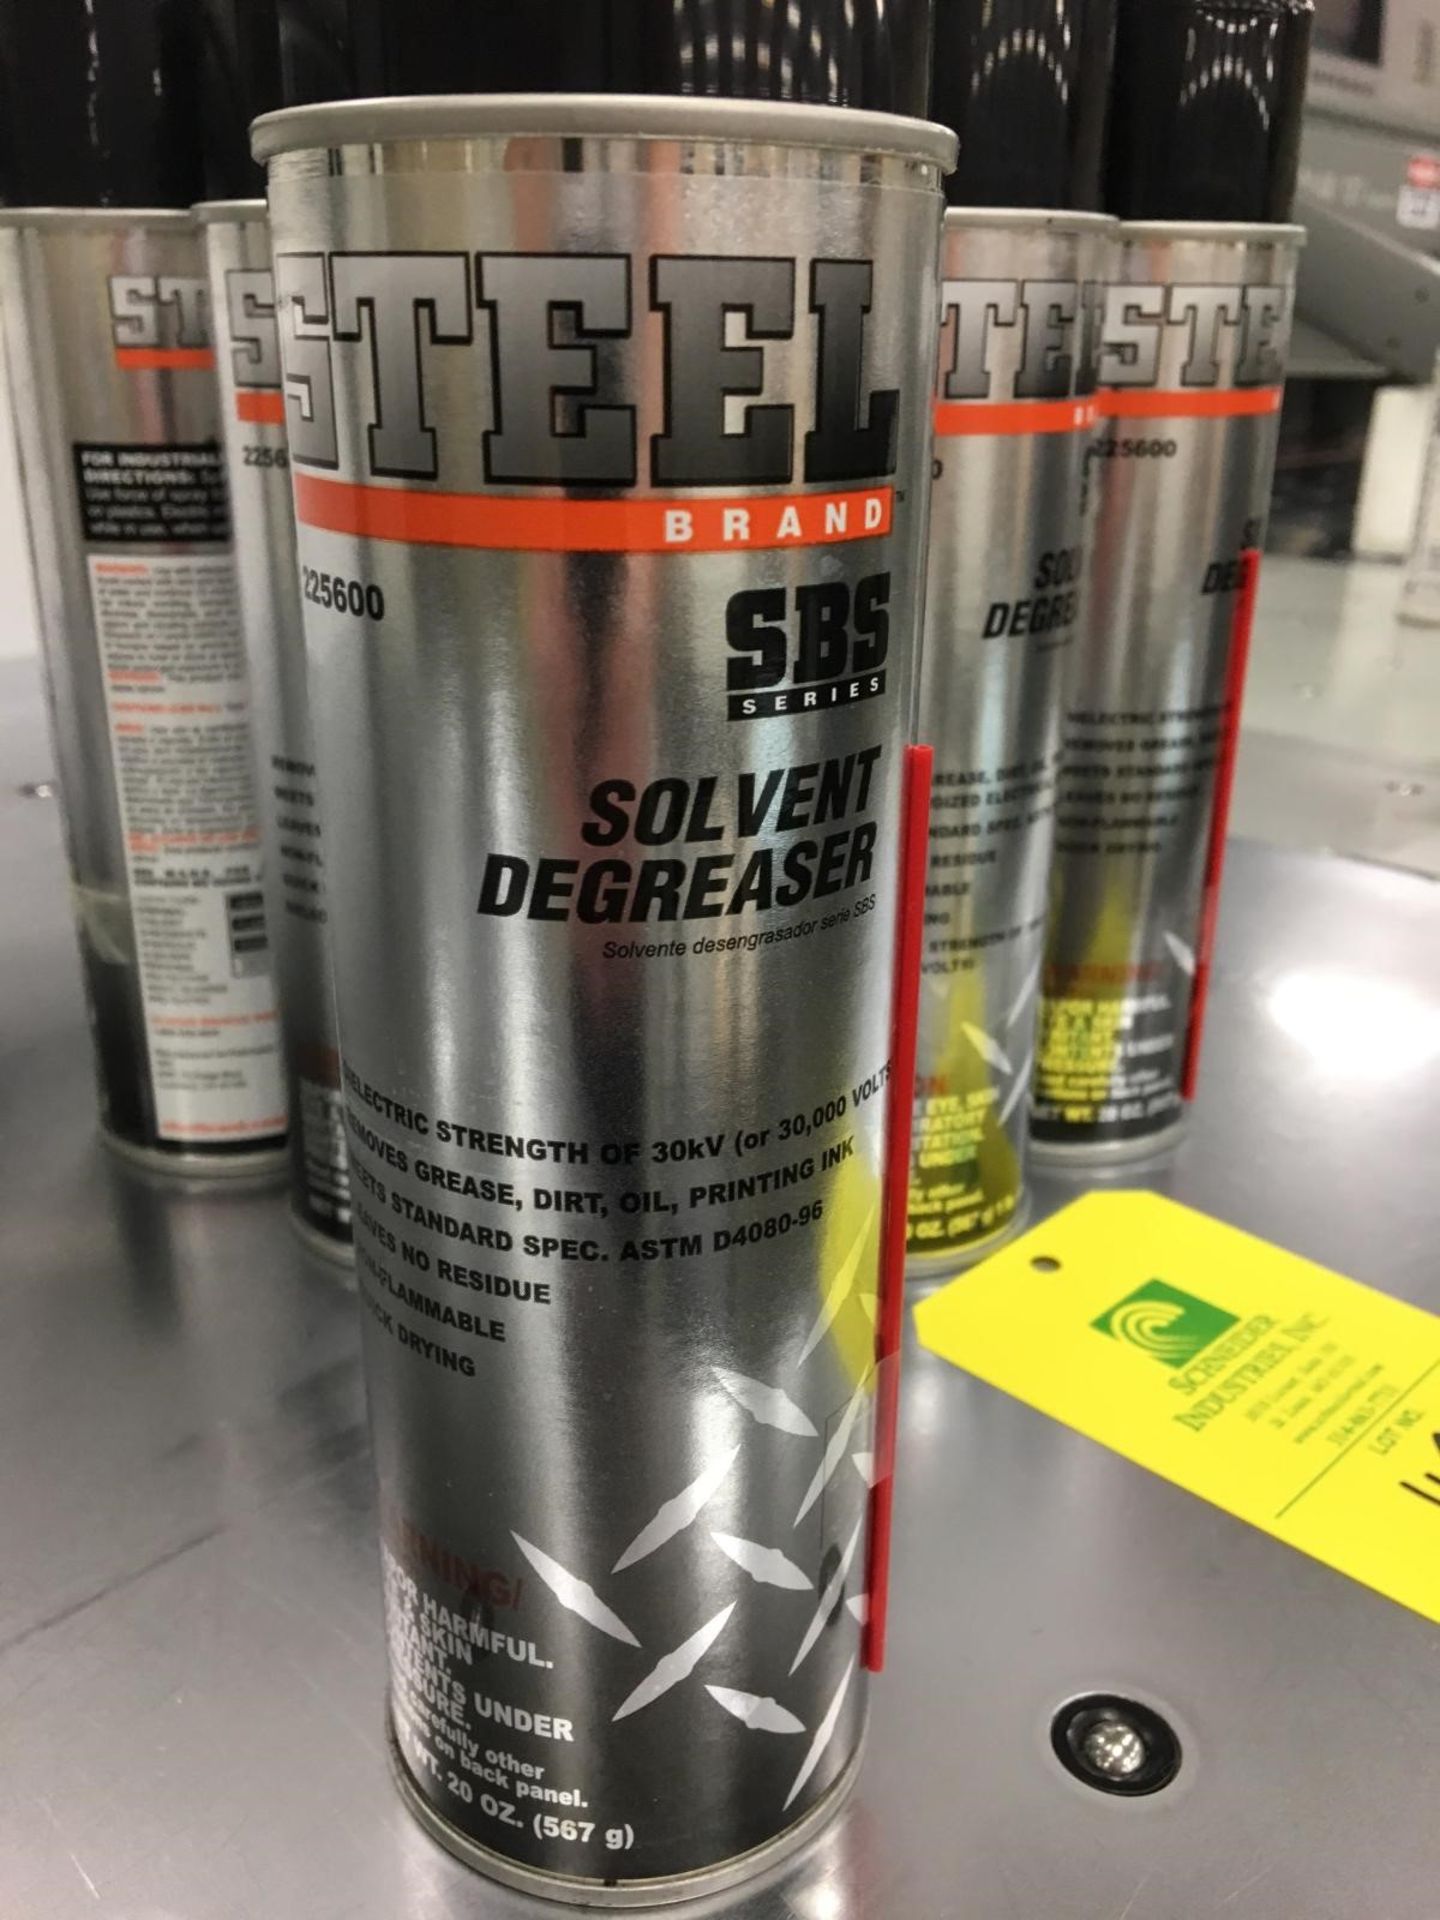 (17) Cans of Steel Solvent Degreaser, SBS Series, Removal Fee: $5 - Image 2 of 3